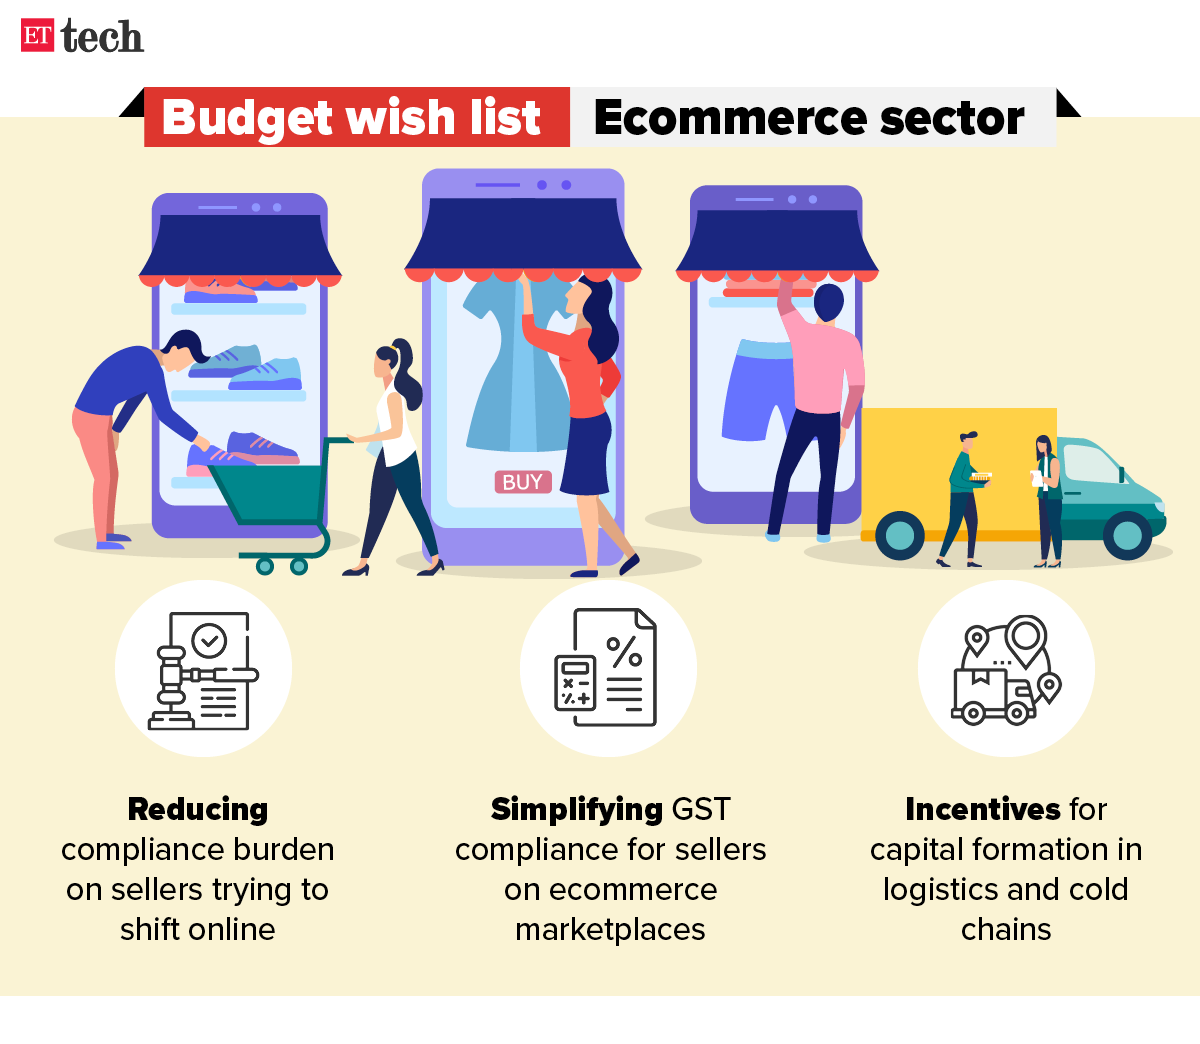 Ecommerce sector